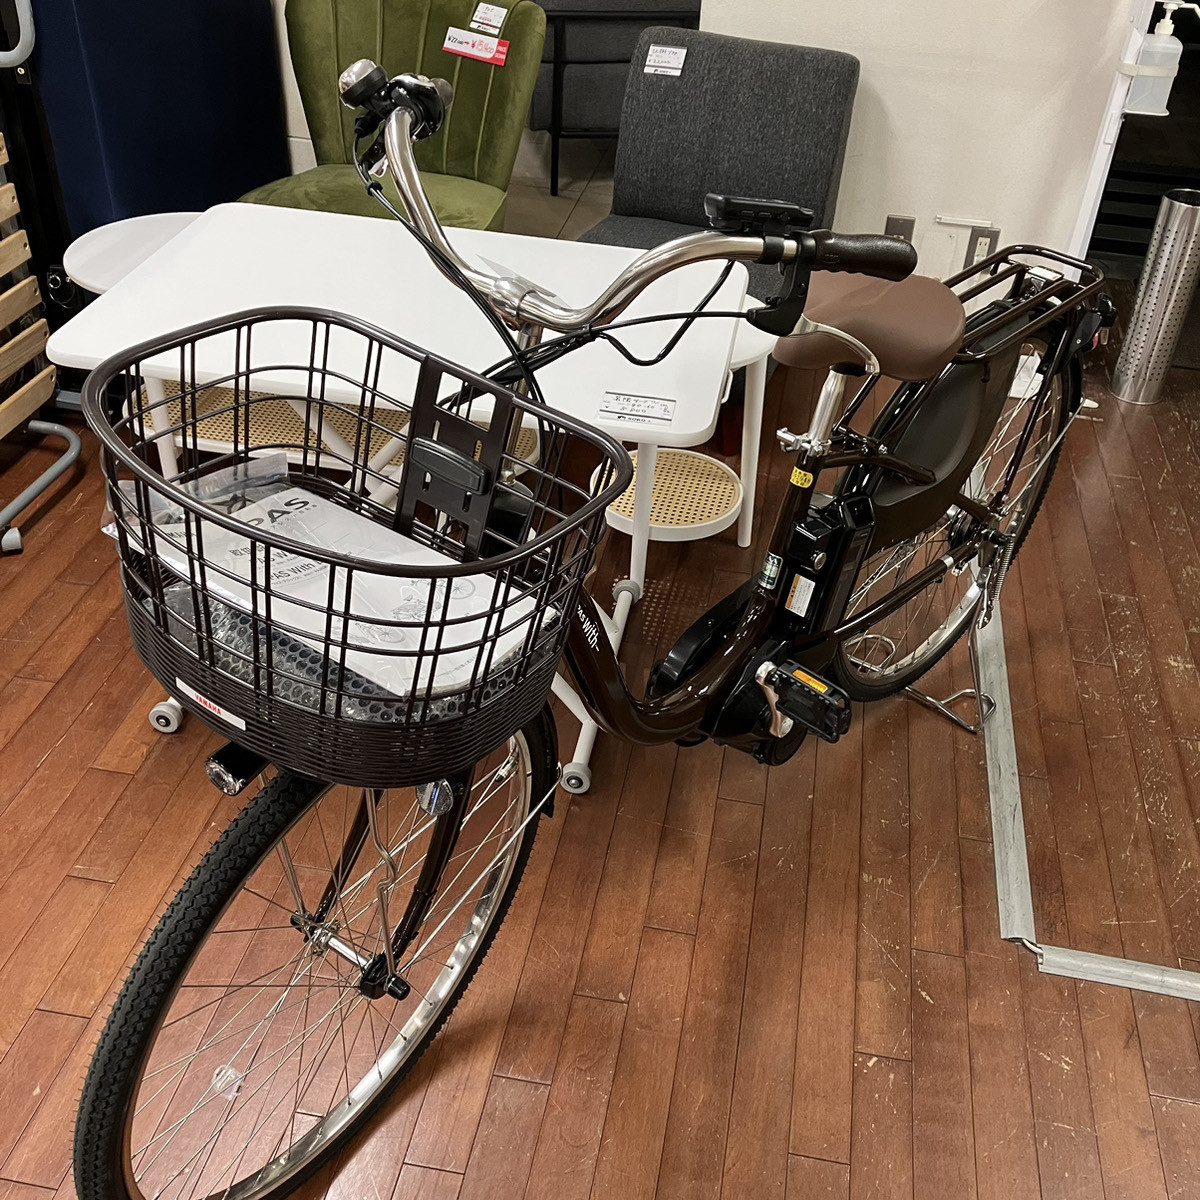 SOKO＋麻布店　商品入荷🎉 電動アシスト自転車 PAS With パス ウィズ カカオ✨